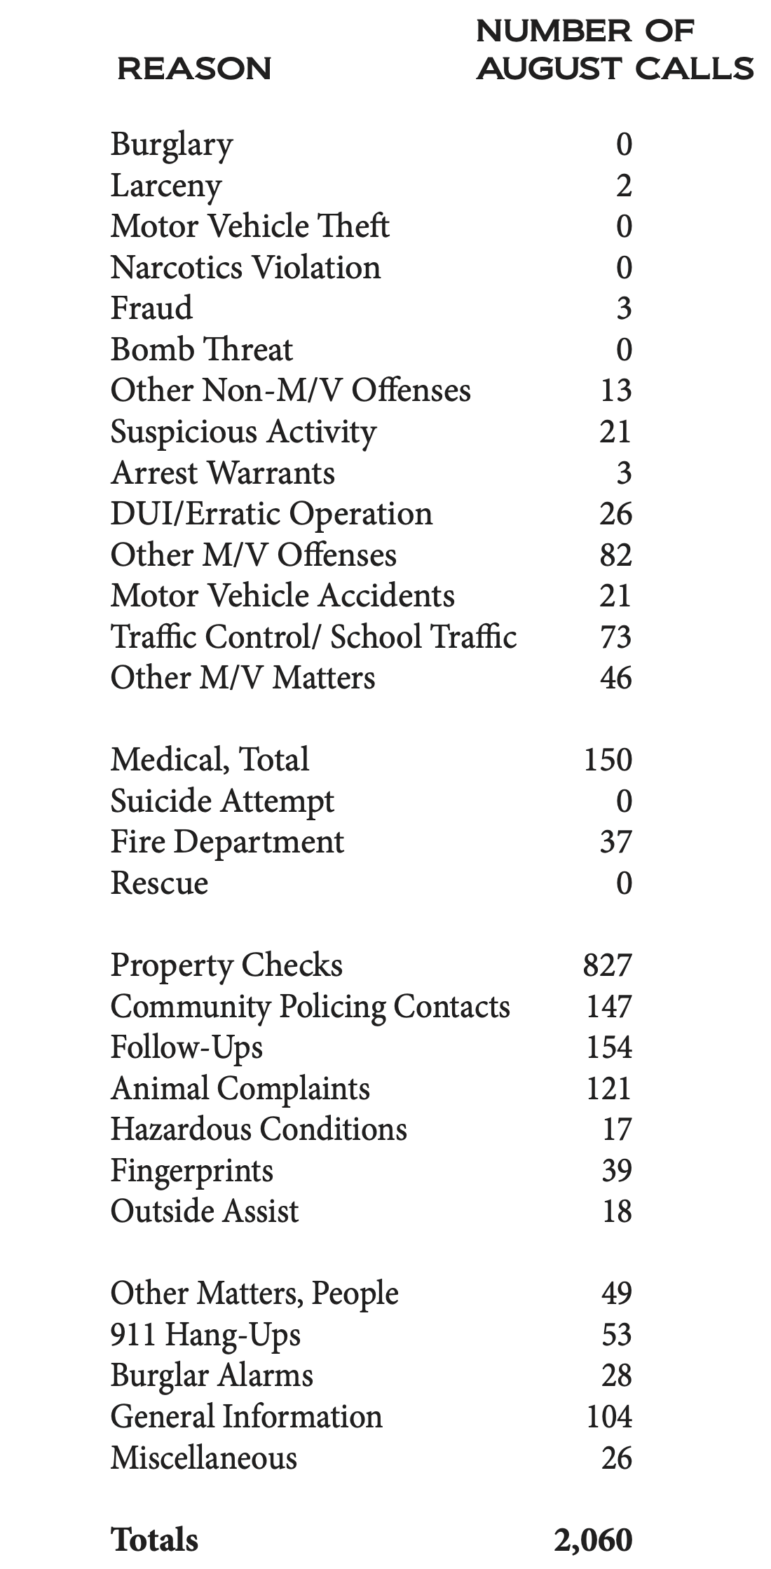 		NUMBER OF   		REASON	AUGUST CALLS          
Burglary	0
Larceny	2	
Motor Vehicle Theft	0	
Narcotics Violation	0	
Fraud	3	
Bomb Threat	0	
Other Non-M/V Offenses	13	
Suspicious Activity	21	
Arrest Warrants	3	
DUI/Erratic Operation	26	
Other M/V Offenses	82	 
Motor Vehicle Accidents	21	
Traffic Control/ School Traffic	73	
Other M/V Matters	46	
		
Medical, Total	150	
Suicide Attempt	0	
Fire Department	37
Rescue	0	
		
Property Checks	827	
Community Policing Contacts	147	
Follow-Ups	154	
Animal Complaints	121	
Hazardous Conditions	17	
Fingerprints	39	
Outside Assist	18
	
Other Matters, People	49	
911 Hang-Ups	53	
Burglar Alarms	28	
General Information	104	
Miscellaneous	26

Totals	2,060	